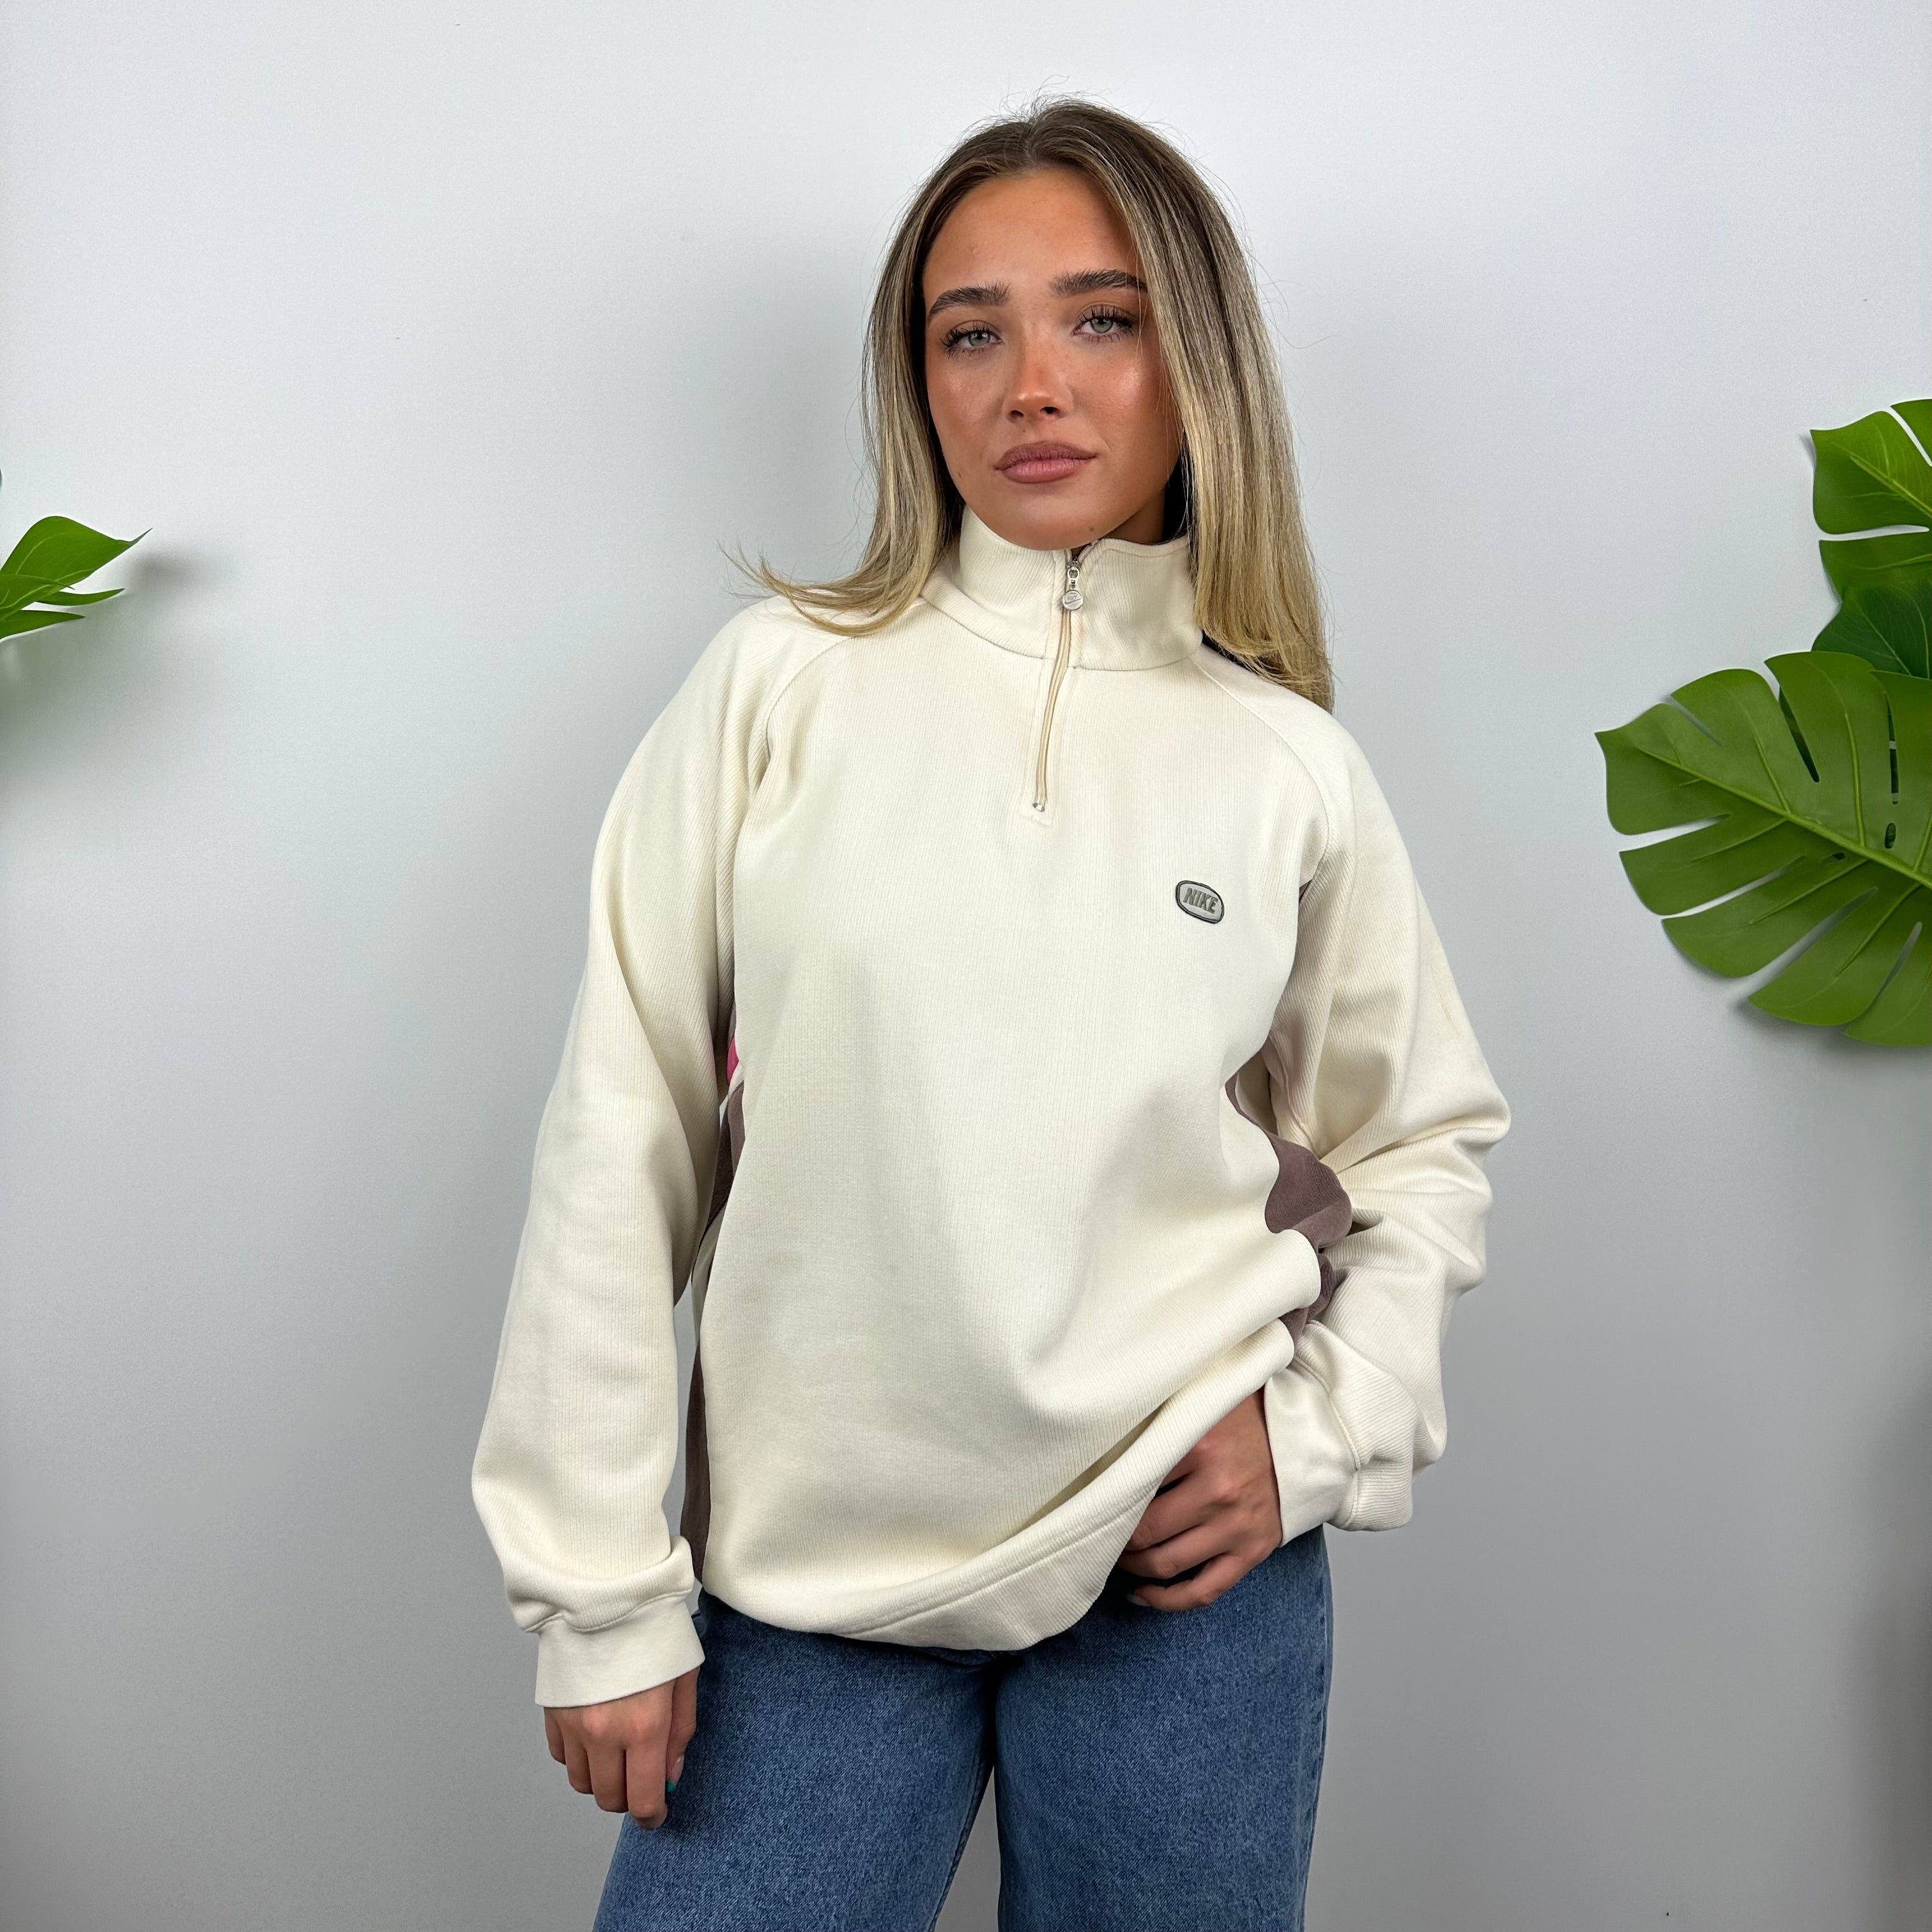 Nike Cream Embroidered Spell Out Quarter Zip Sweatshirt (M)